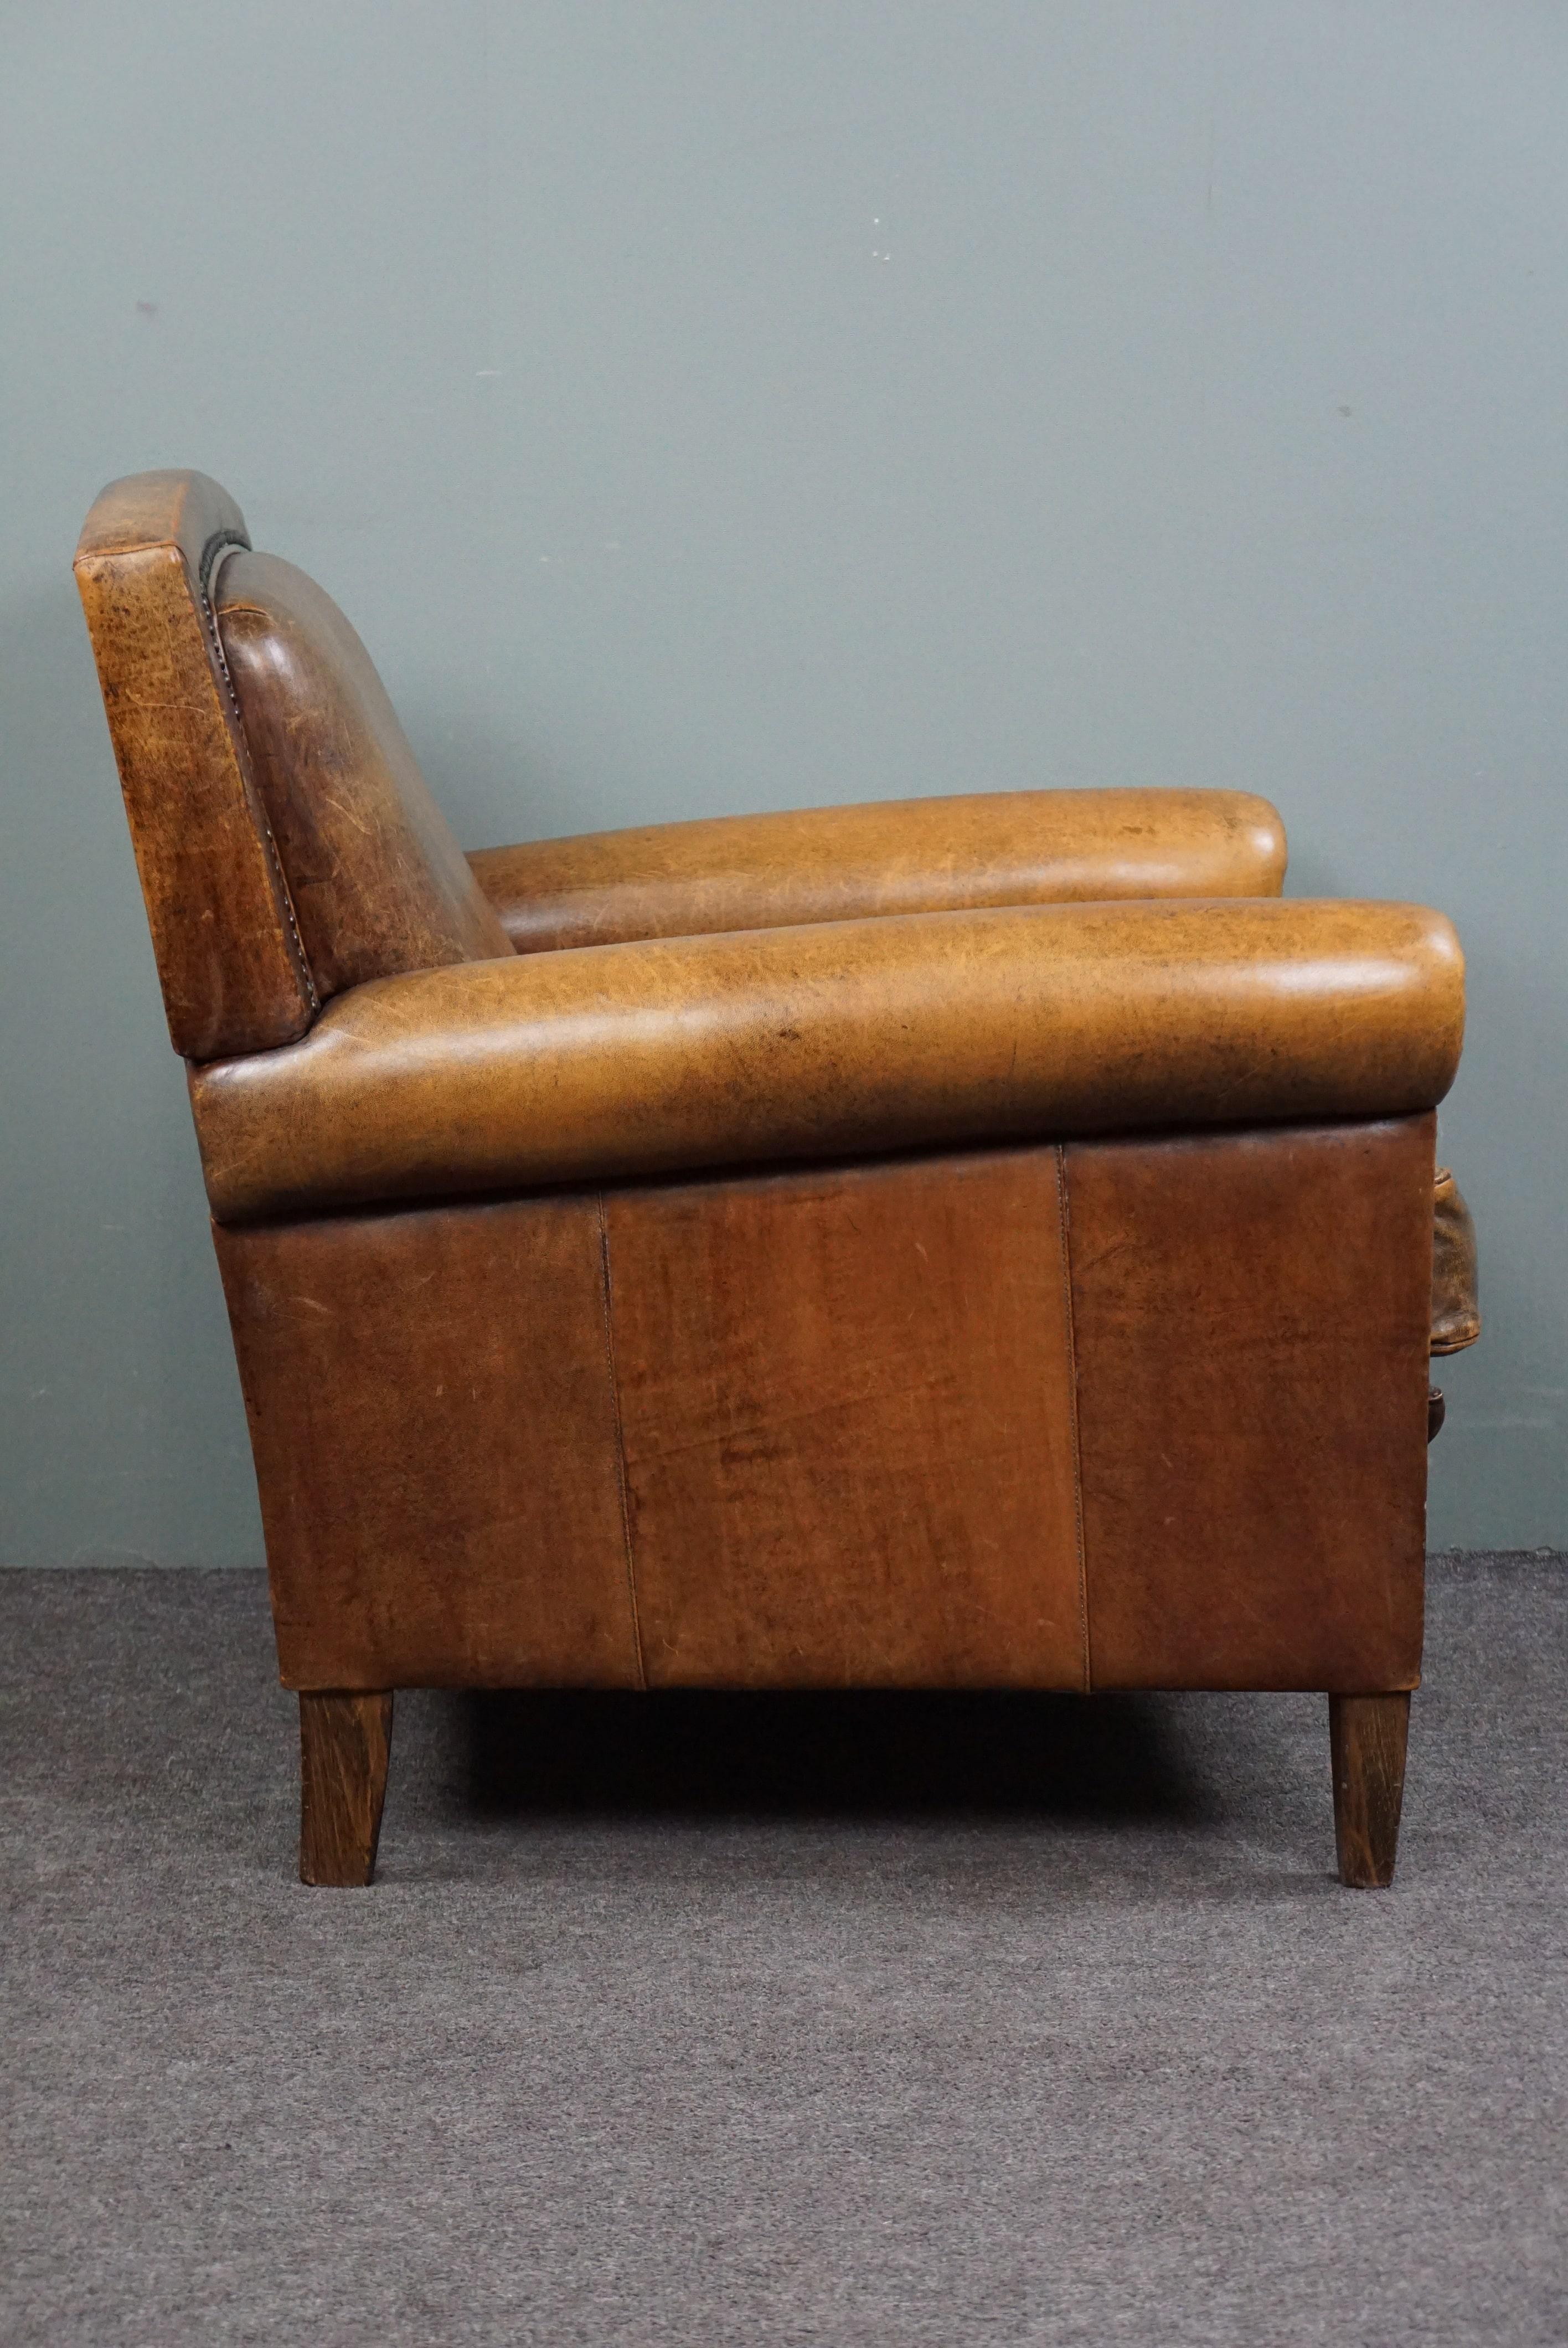 Well-fitting Sheepskin Leather Armchair/Fauteuil. In Excellent Condition For Sale In Harderwijk, NL